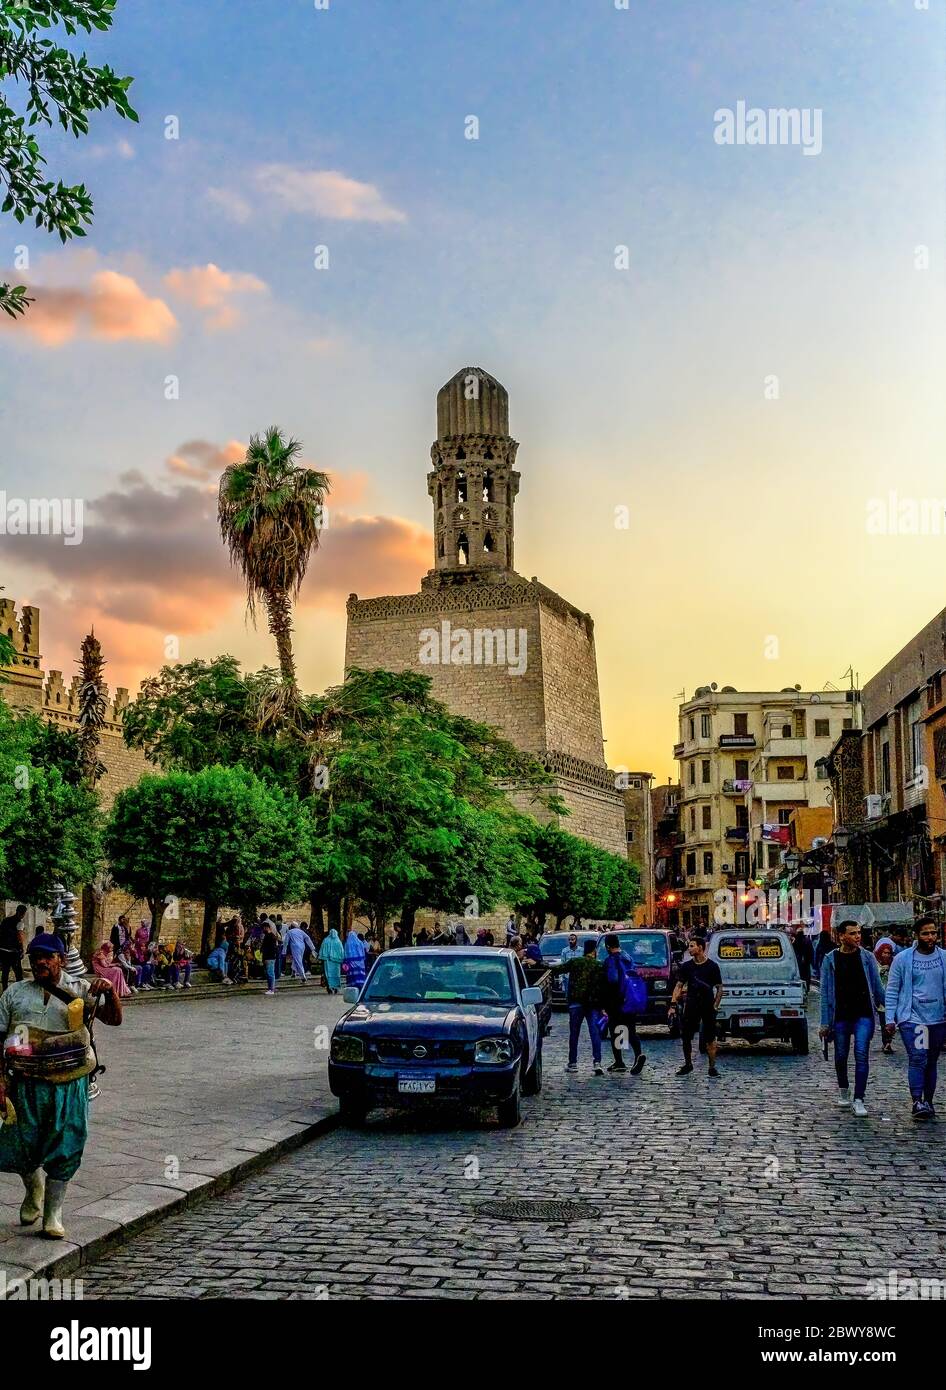 The massive Salient of the El Hakim Mosque Minaret towers above the outer walls of the city at the Southern end of Al-Muizz Street in Islamic Cairo Stock Photo